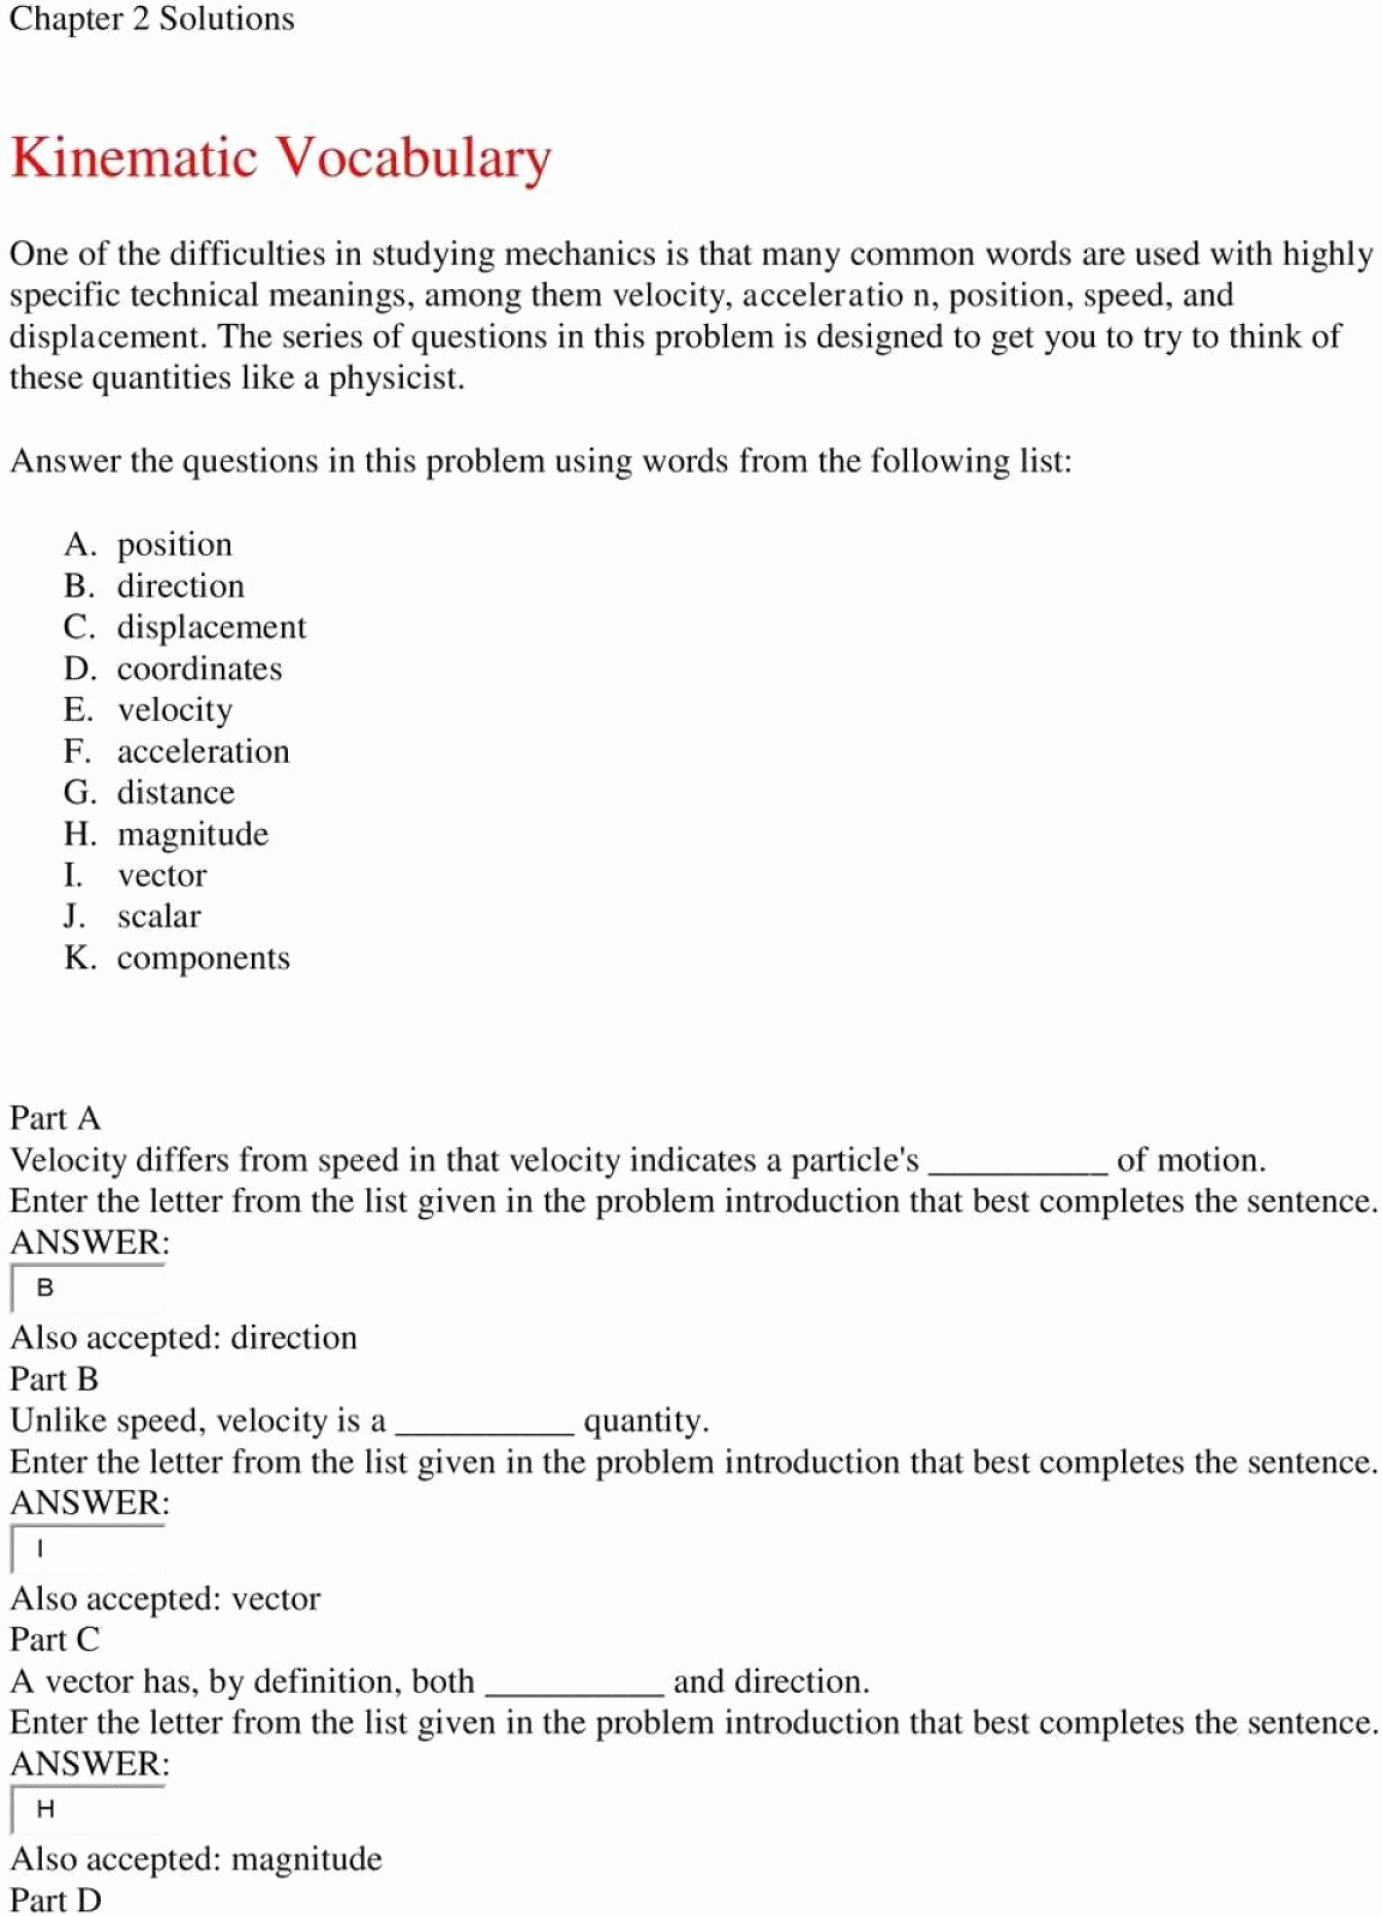 Projectile Motion Worksheet Answers Beautiful Projectile Motion Worksheet Answers the Physics Classroom